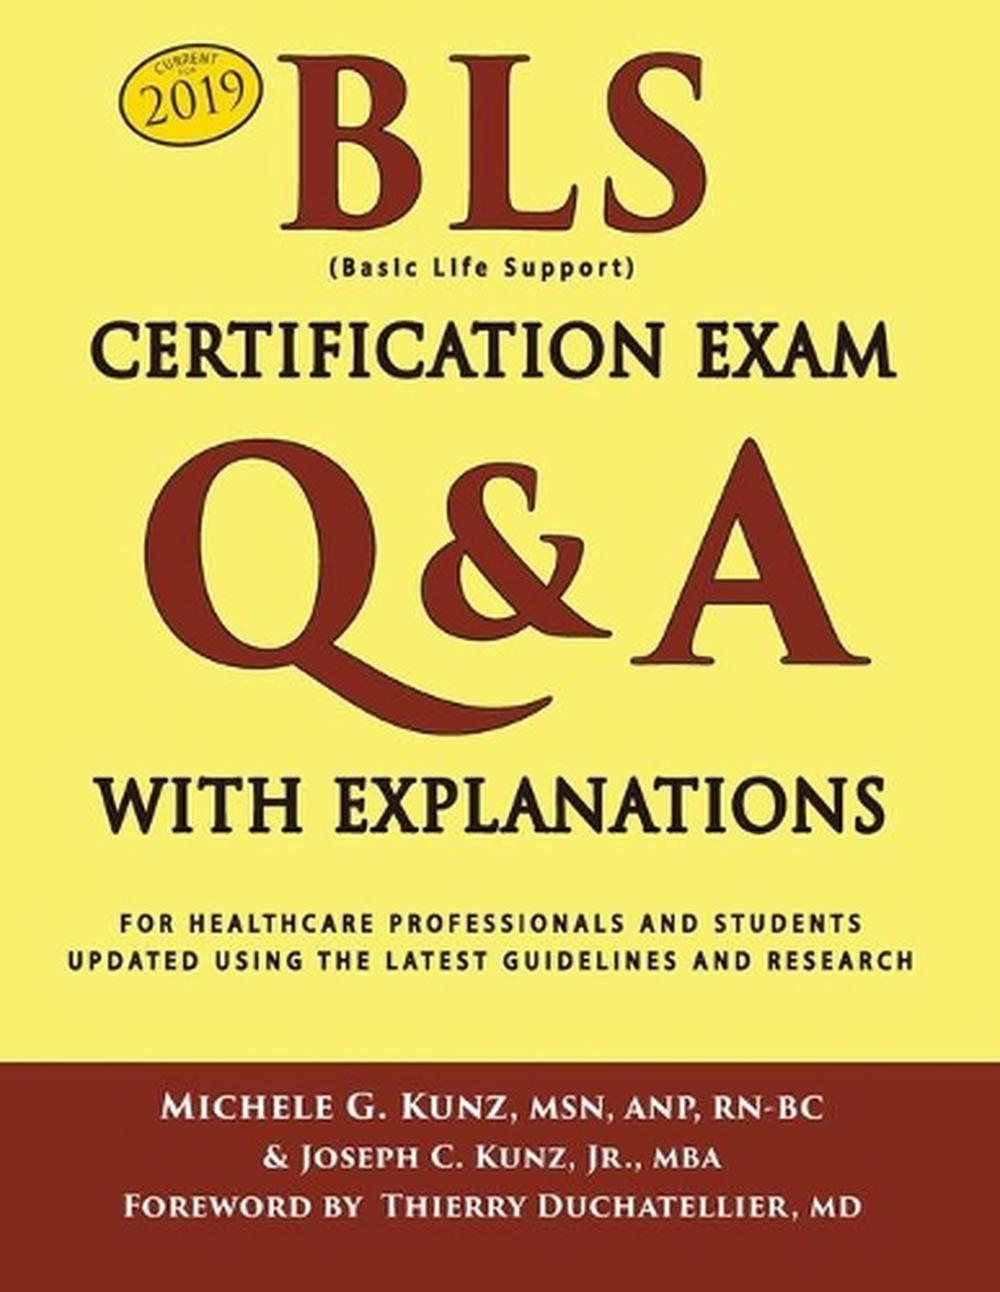 BLS Certification Exam Q&a with Explanations For Healthcare